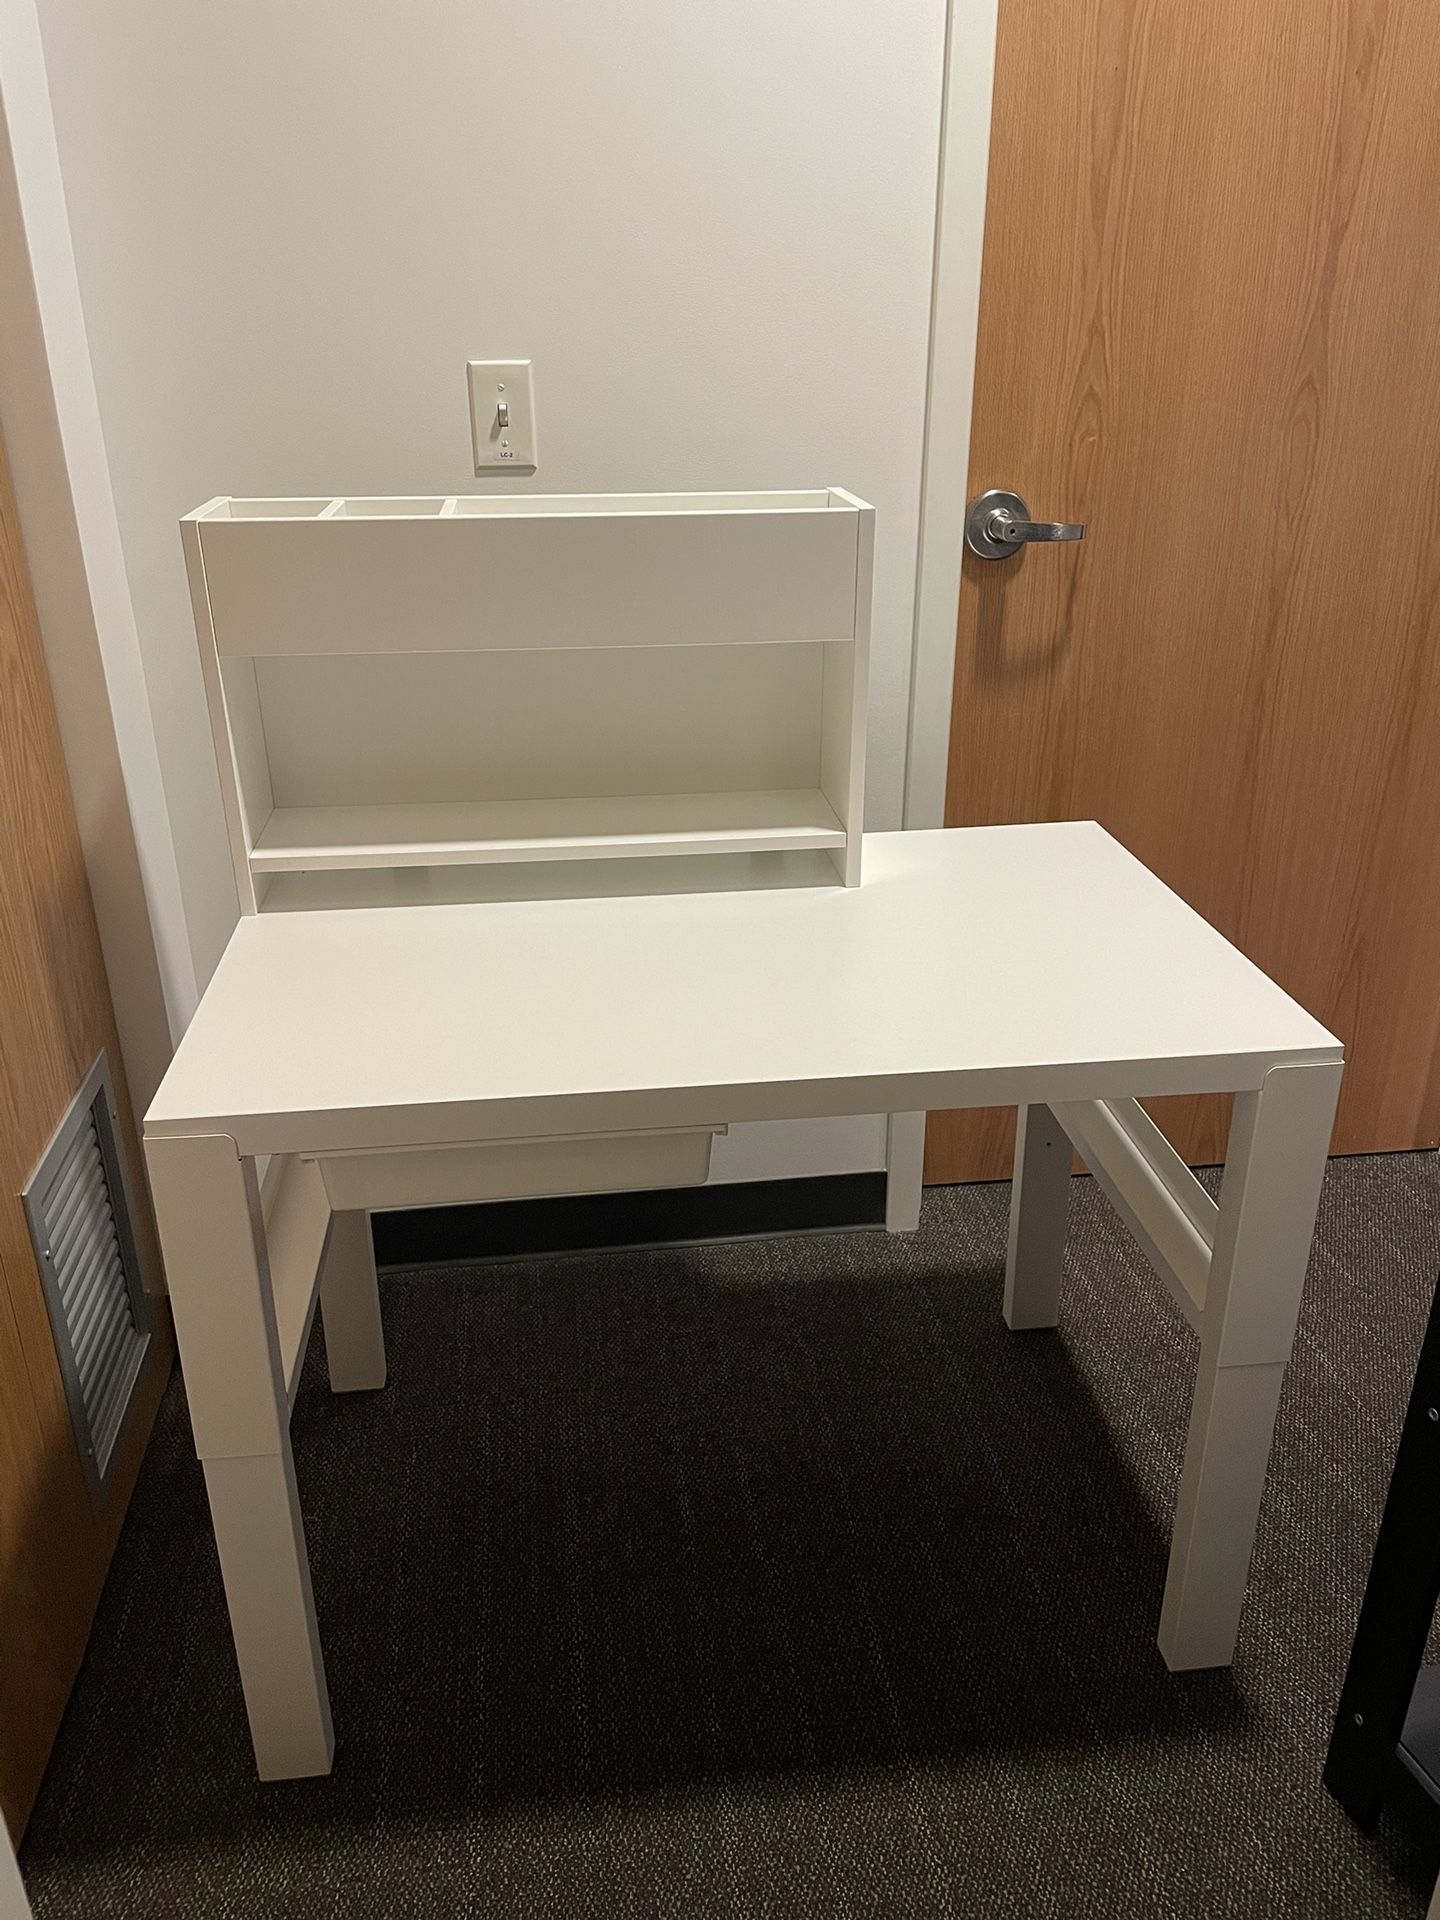 Ikea PAHL Desk with Add-ons